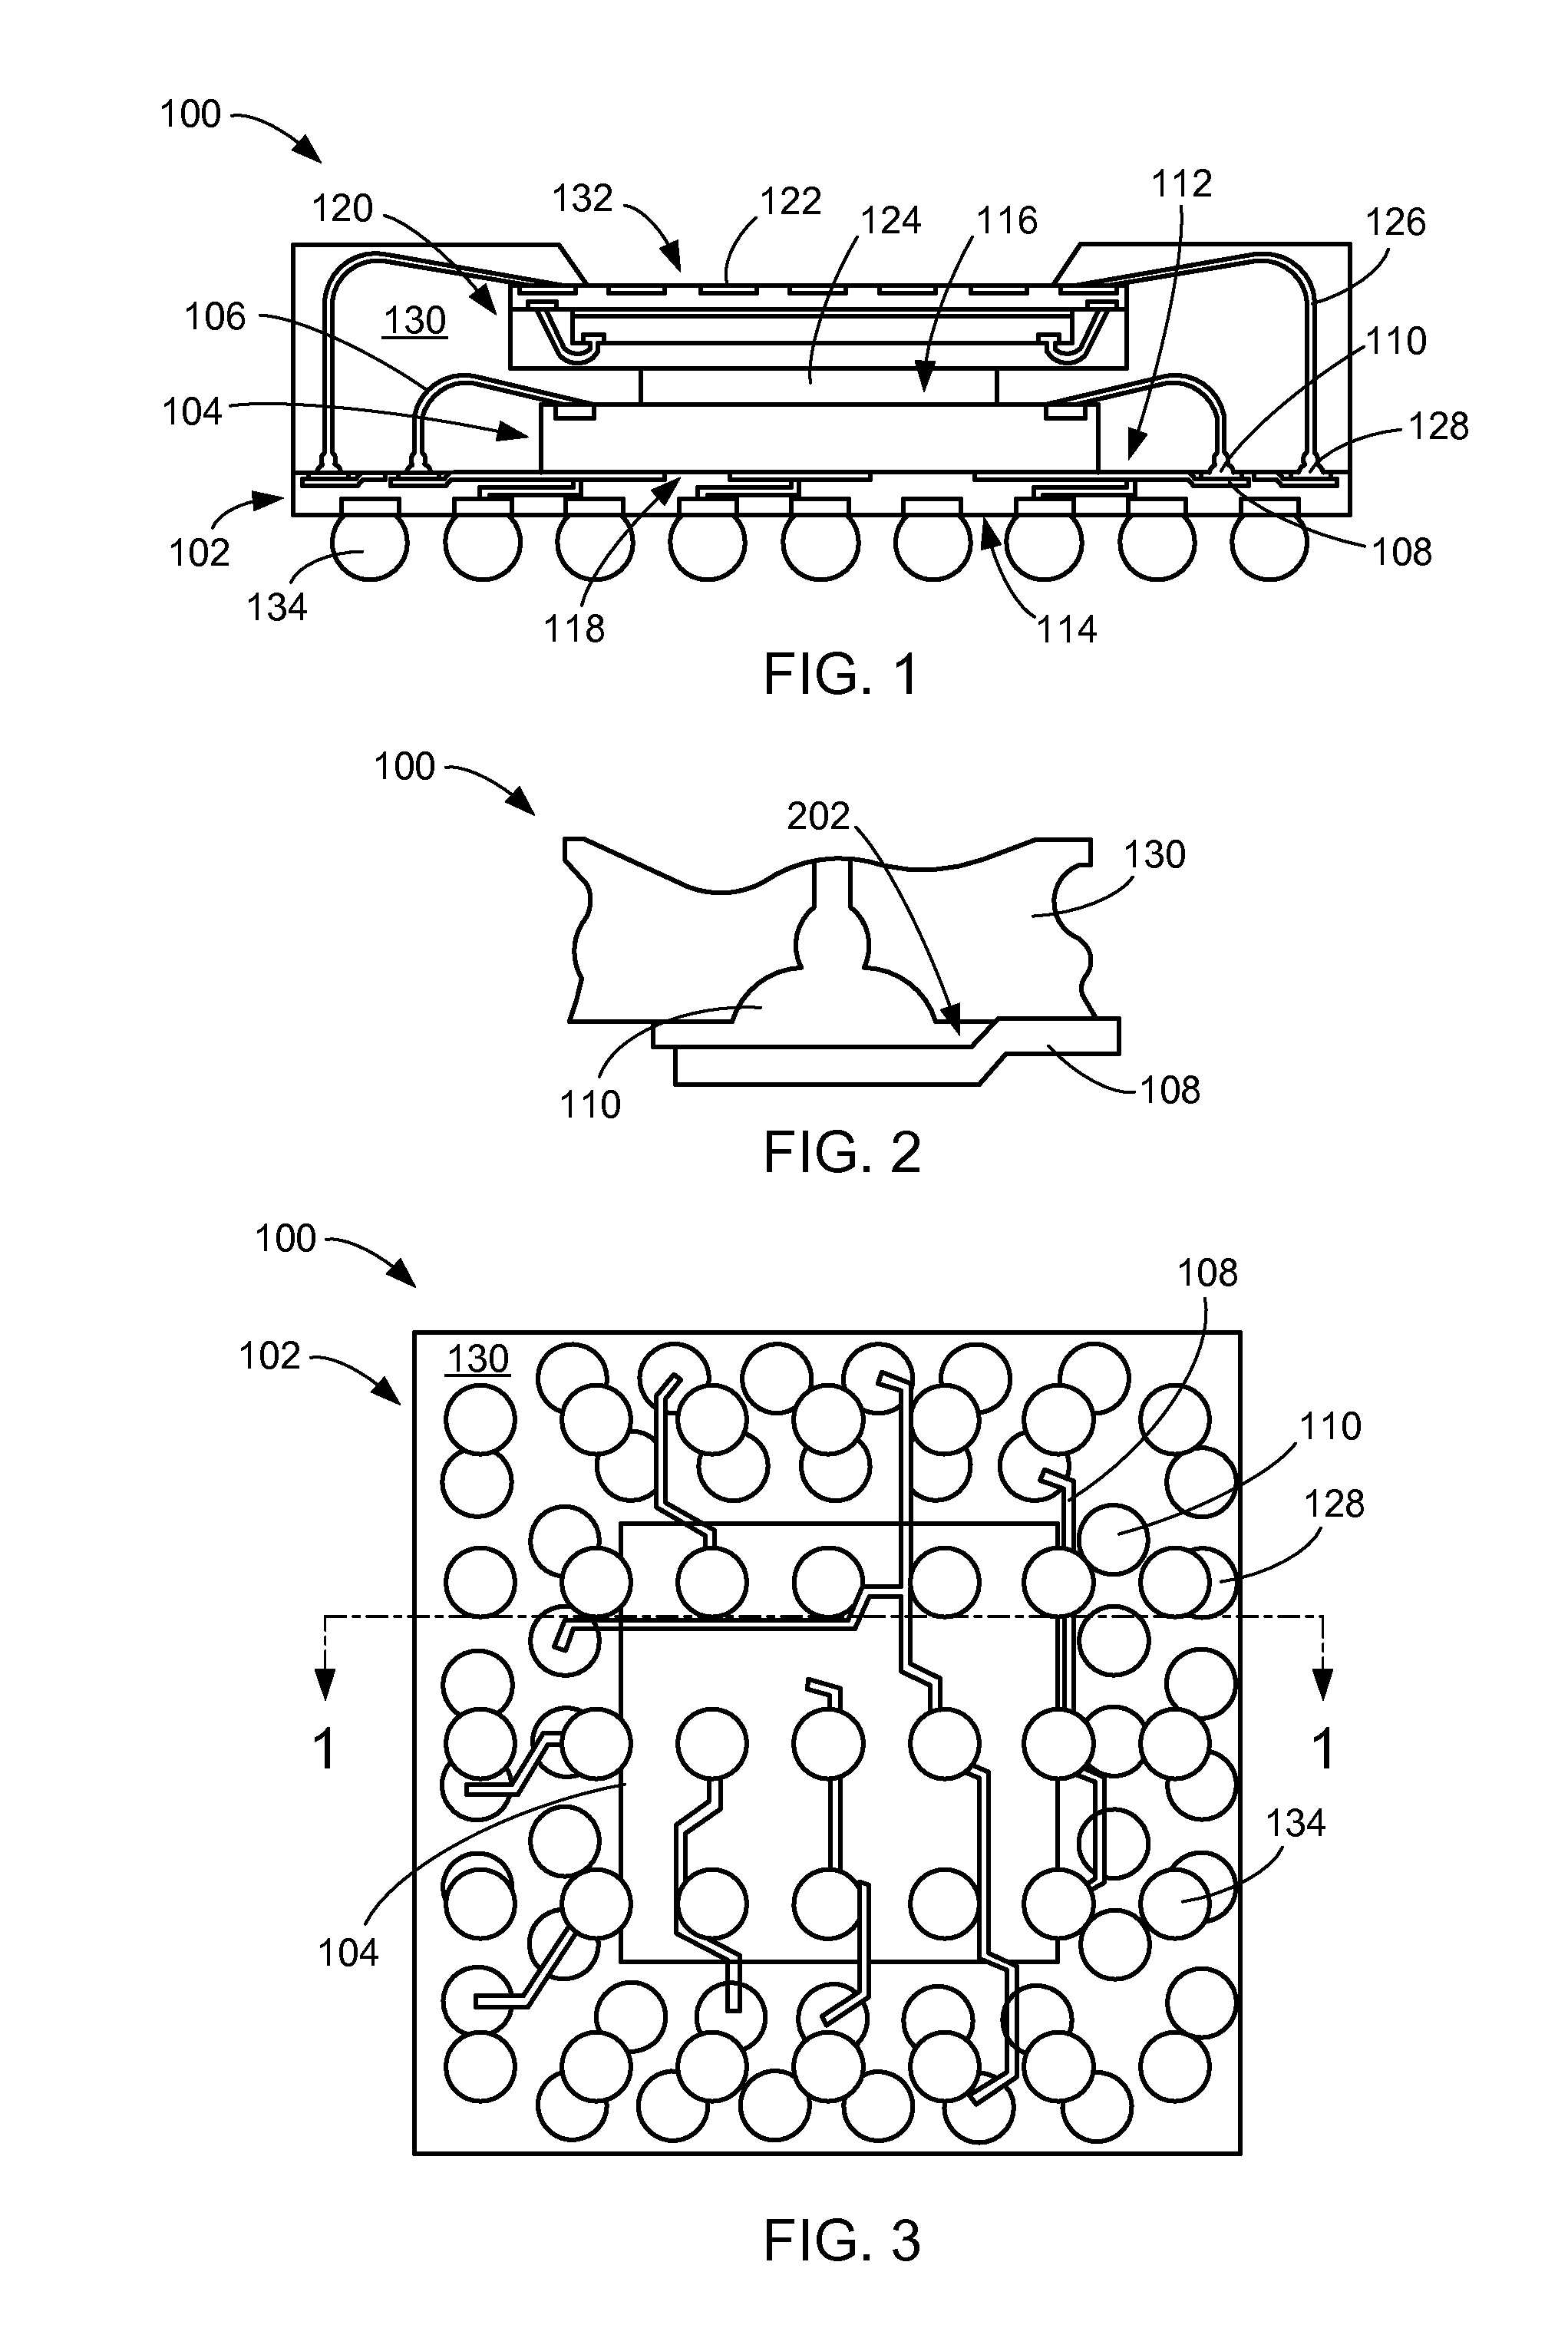 Integrated circuit package system with redistribution layer